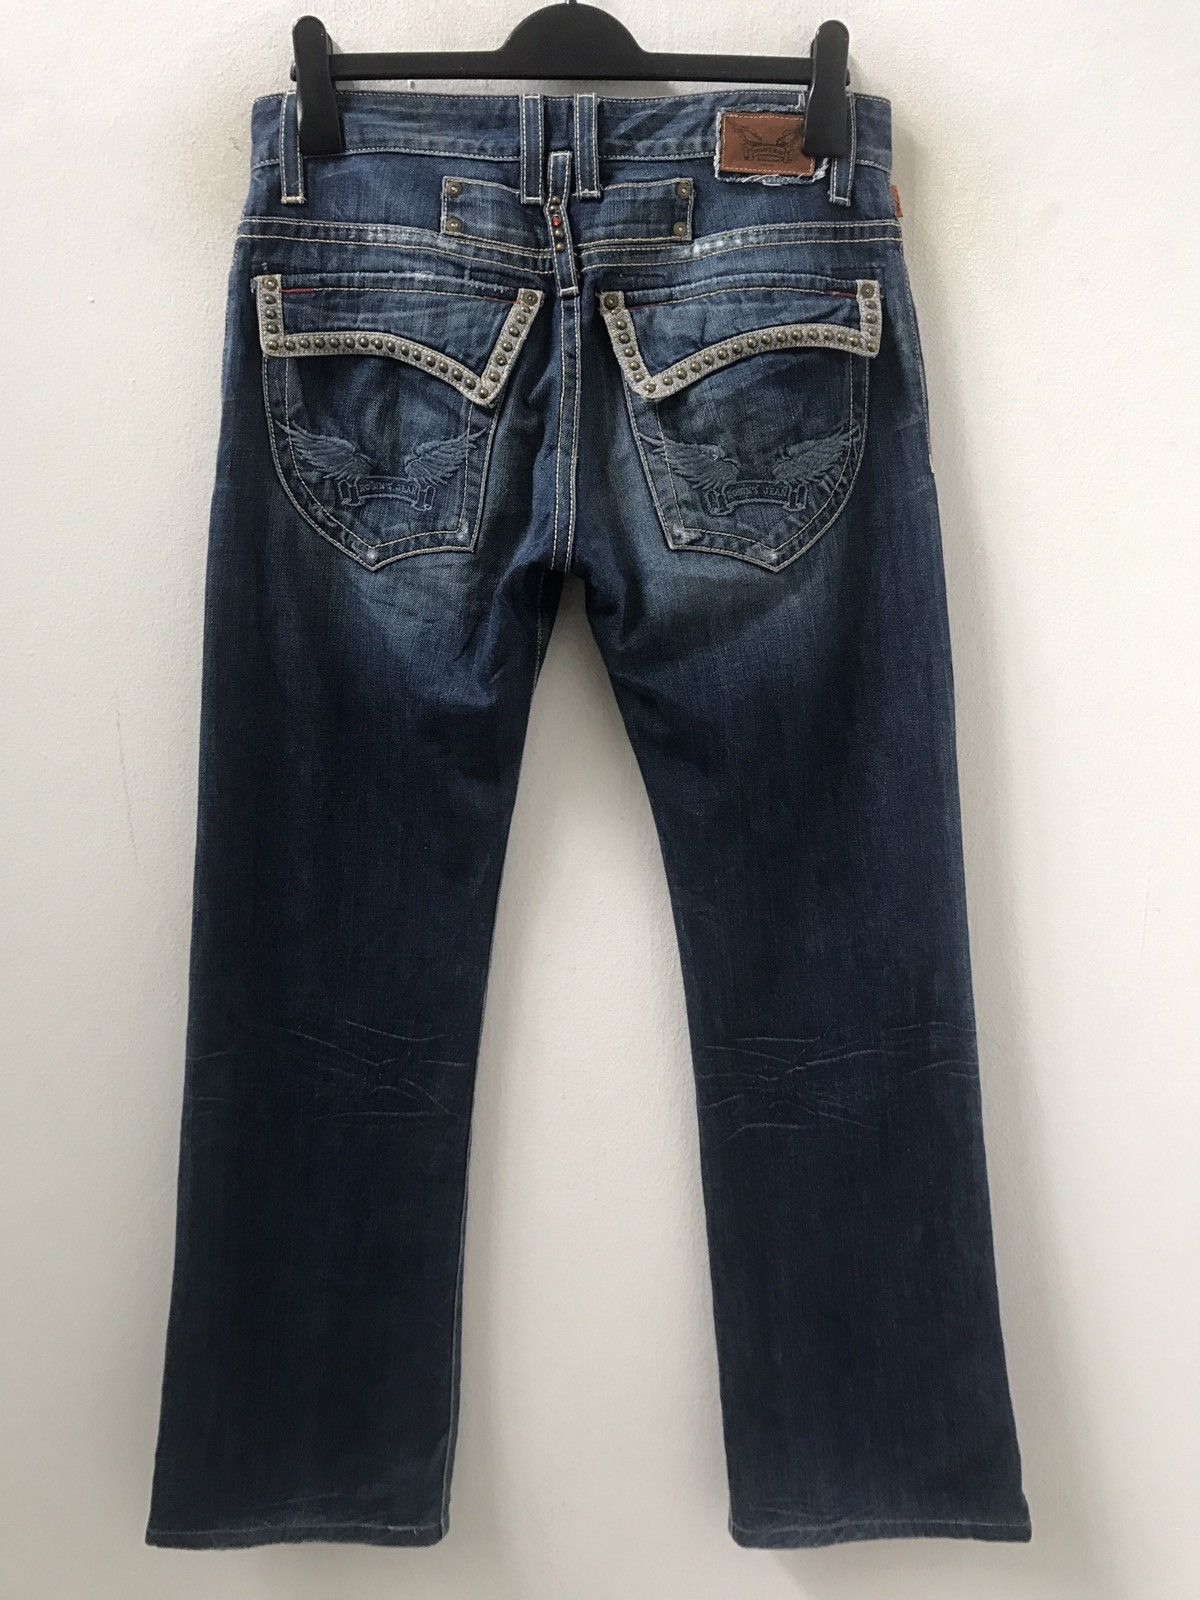 Robins Jeans Robin Jeans Biker Made in Usa Studded Flare Denim Pant ...